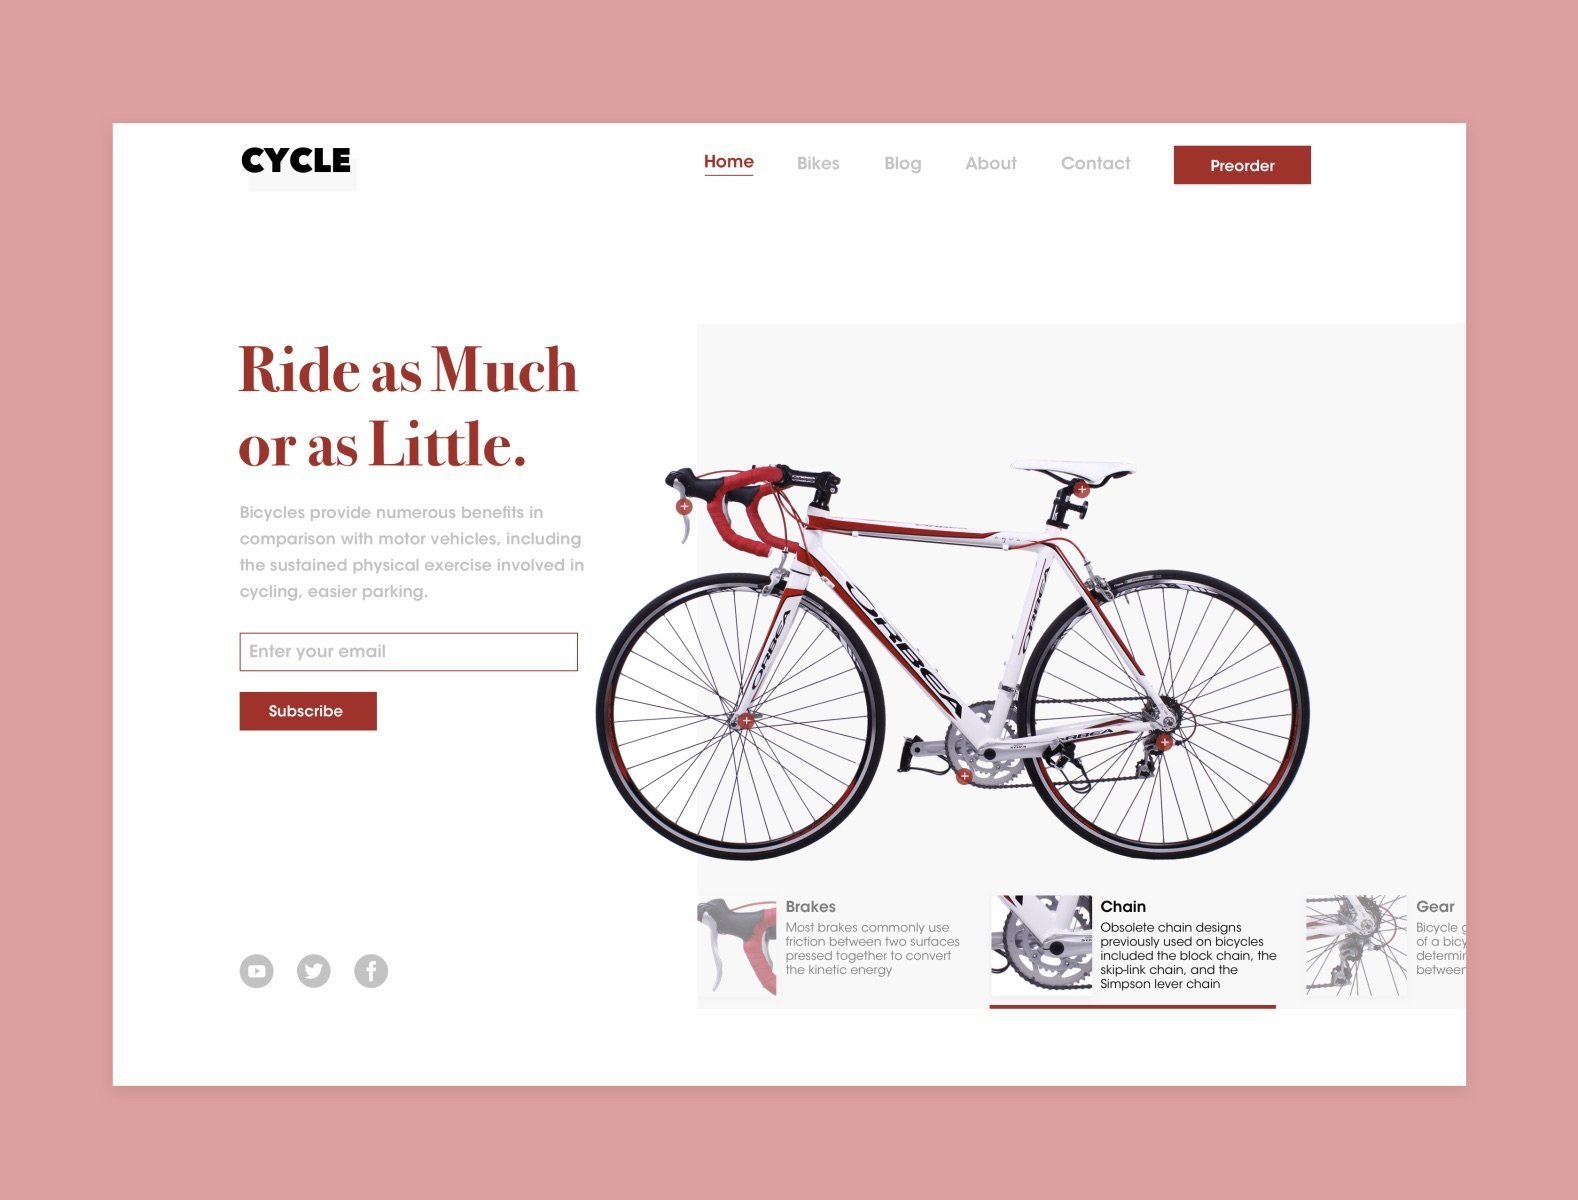 Screenshot of a webpage with a light pink background with a white box that contains the site content with a headline that reads "Ride as Much or as Little" in red, an email subscription form, and a large image of a red and white bicycle to the right.